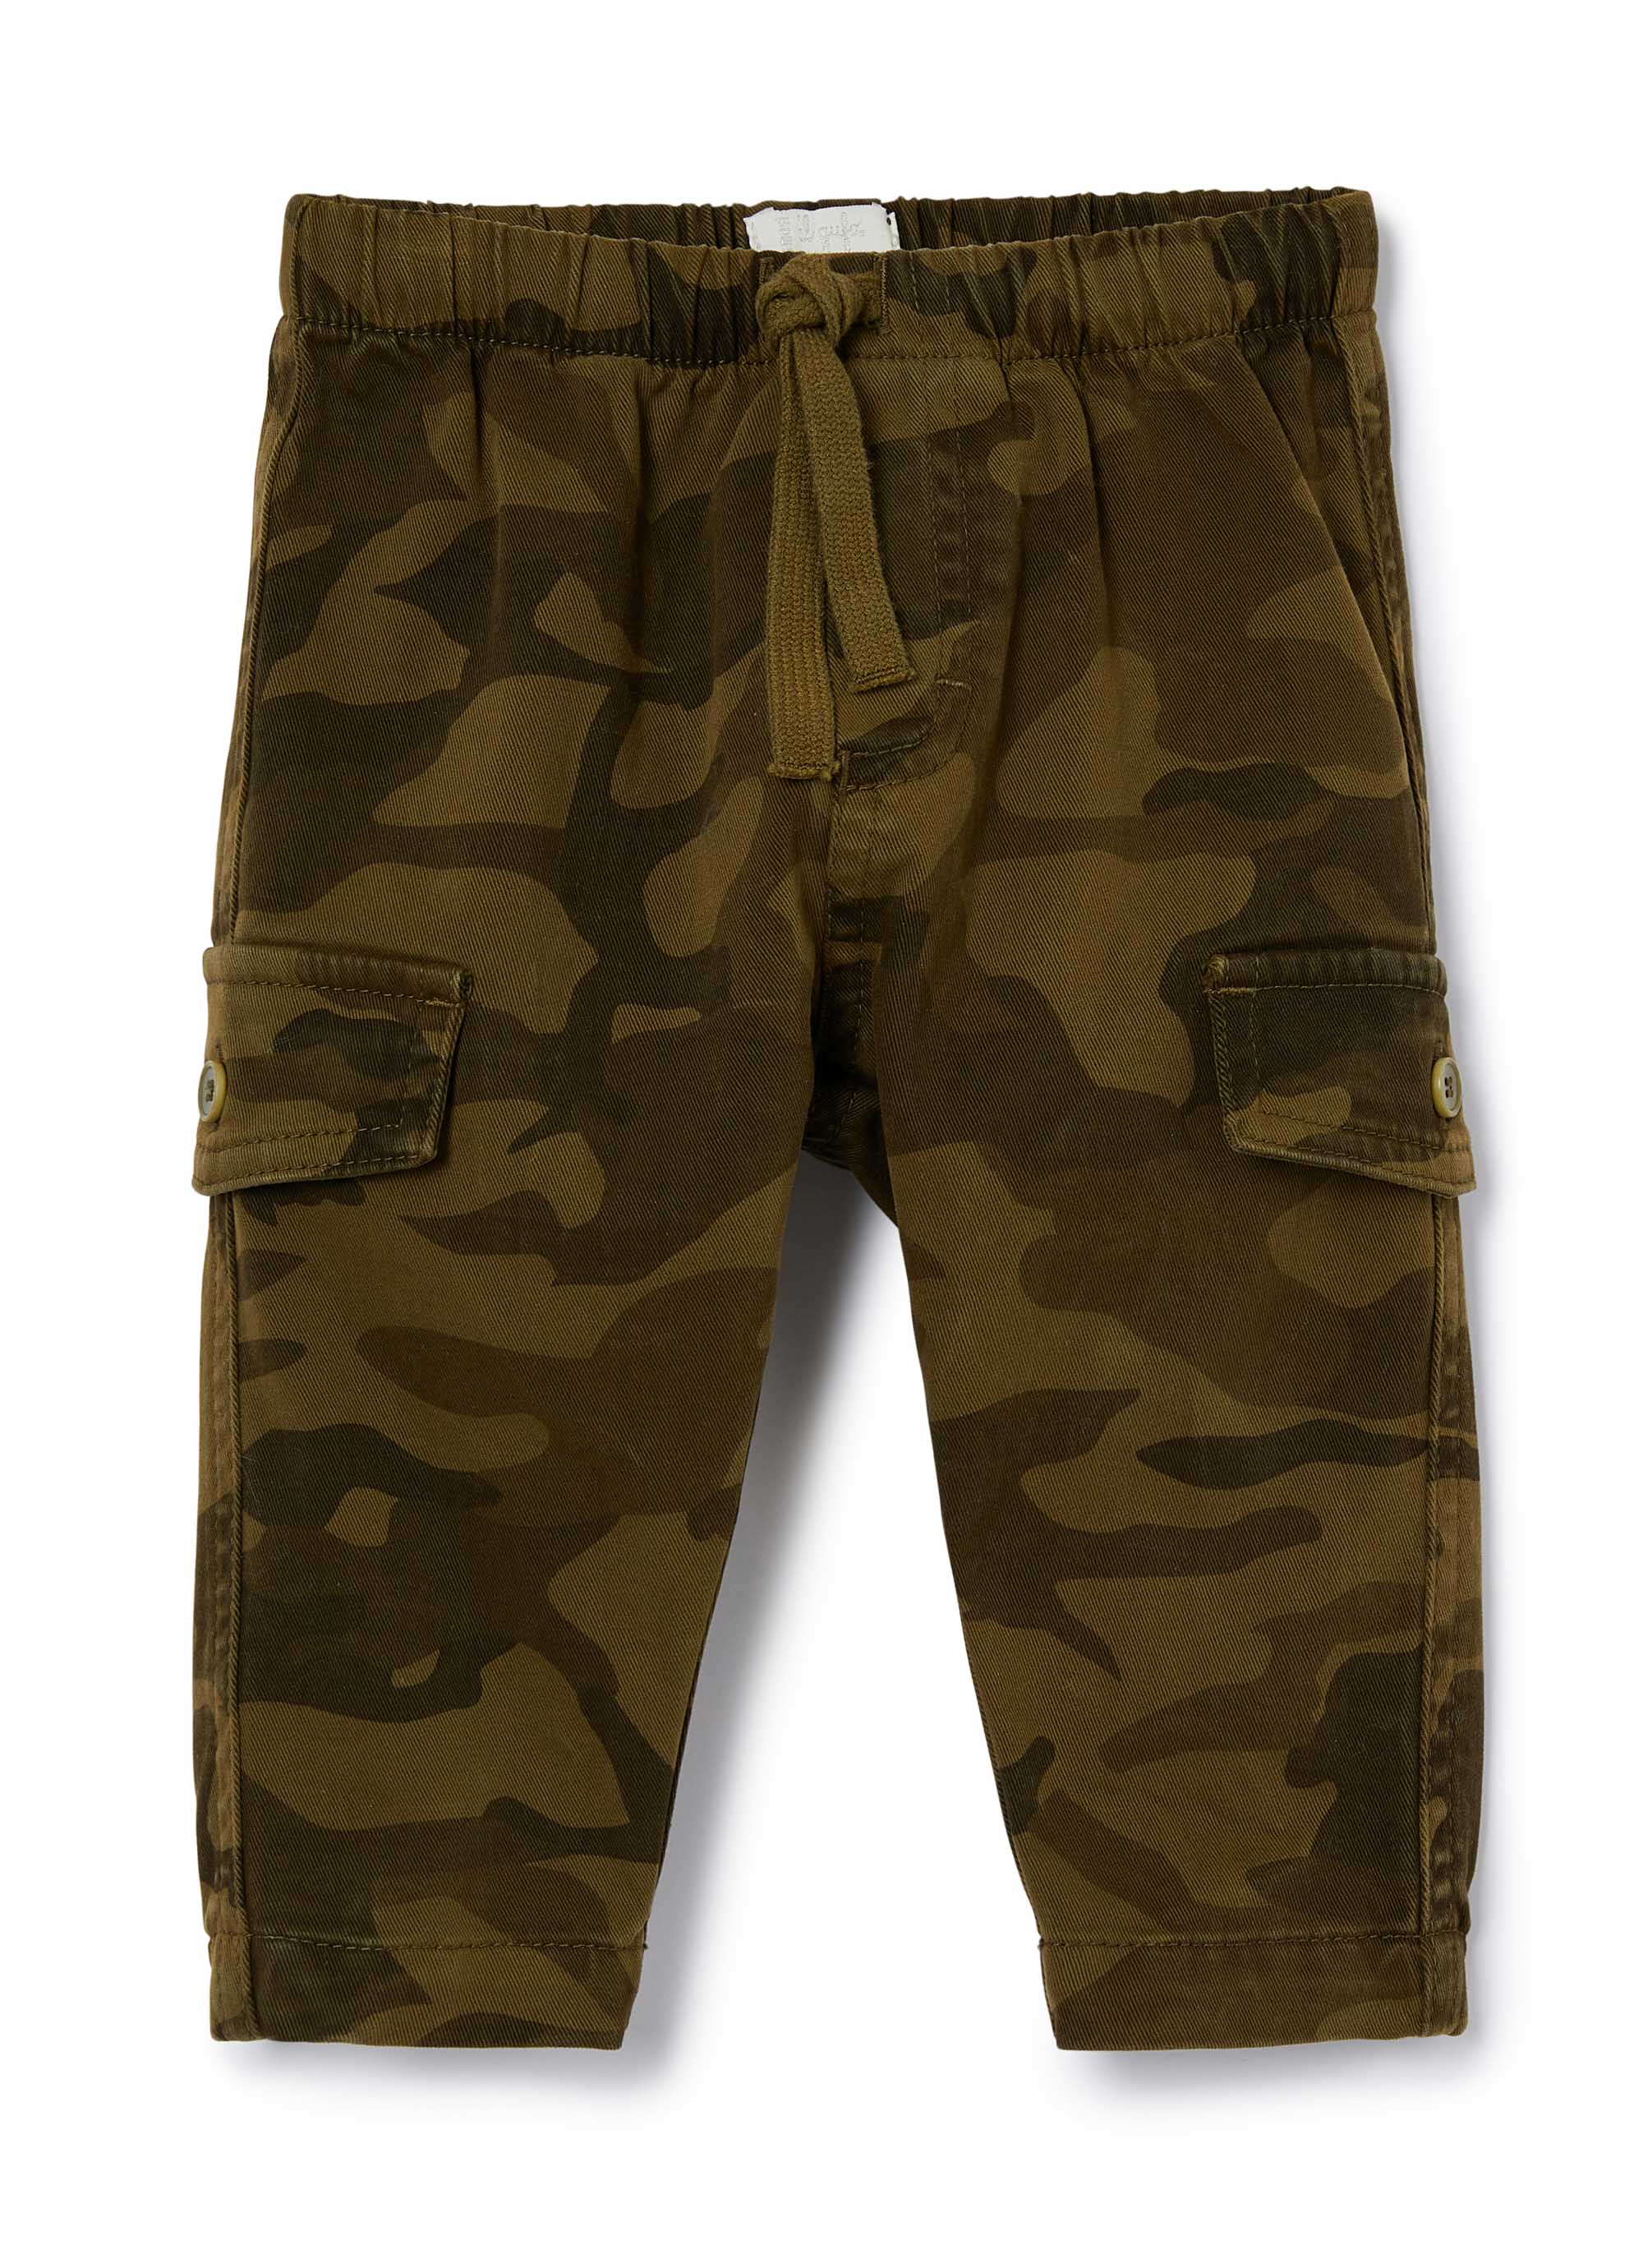 size 18 camo trousers